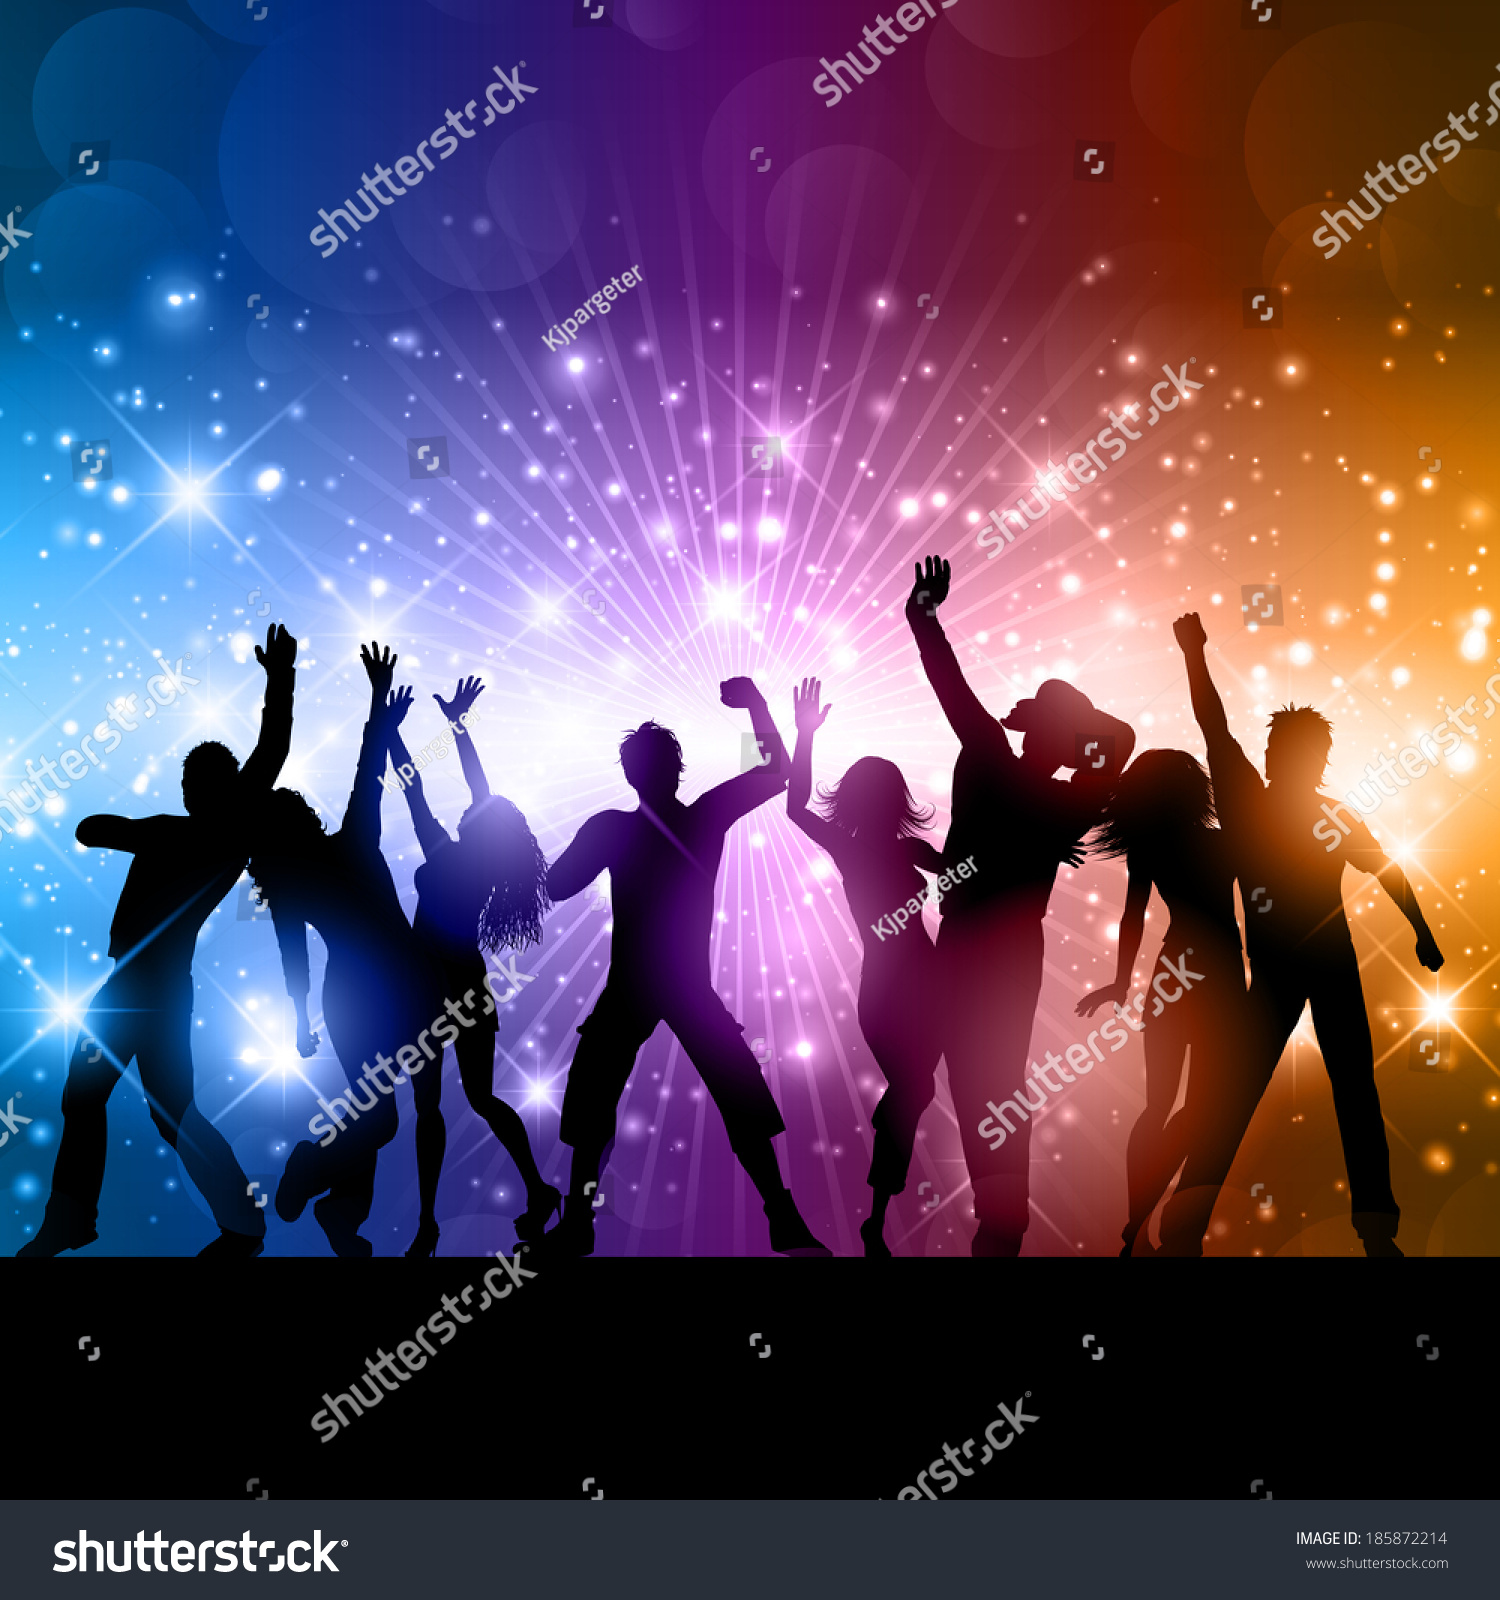 Silhouettes People Dancing On Abstract Background Stock Vector (Royalty ...